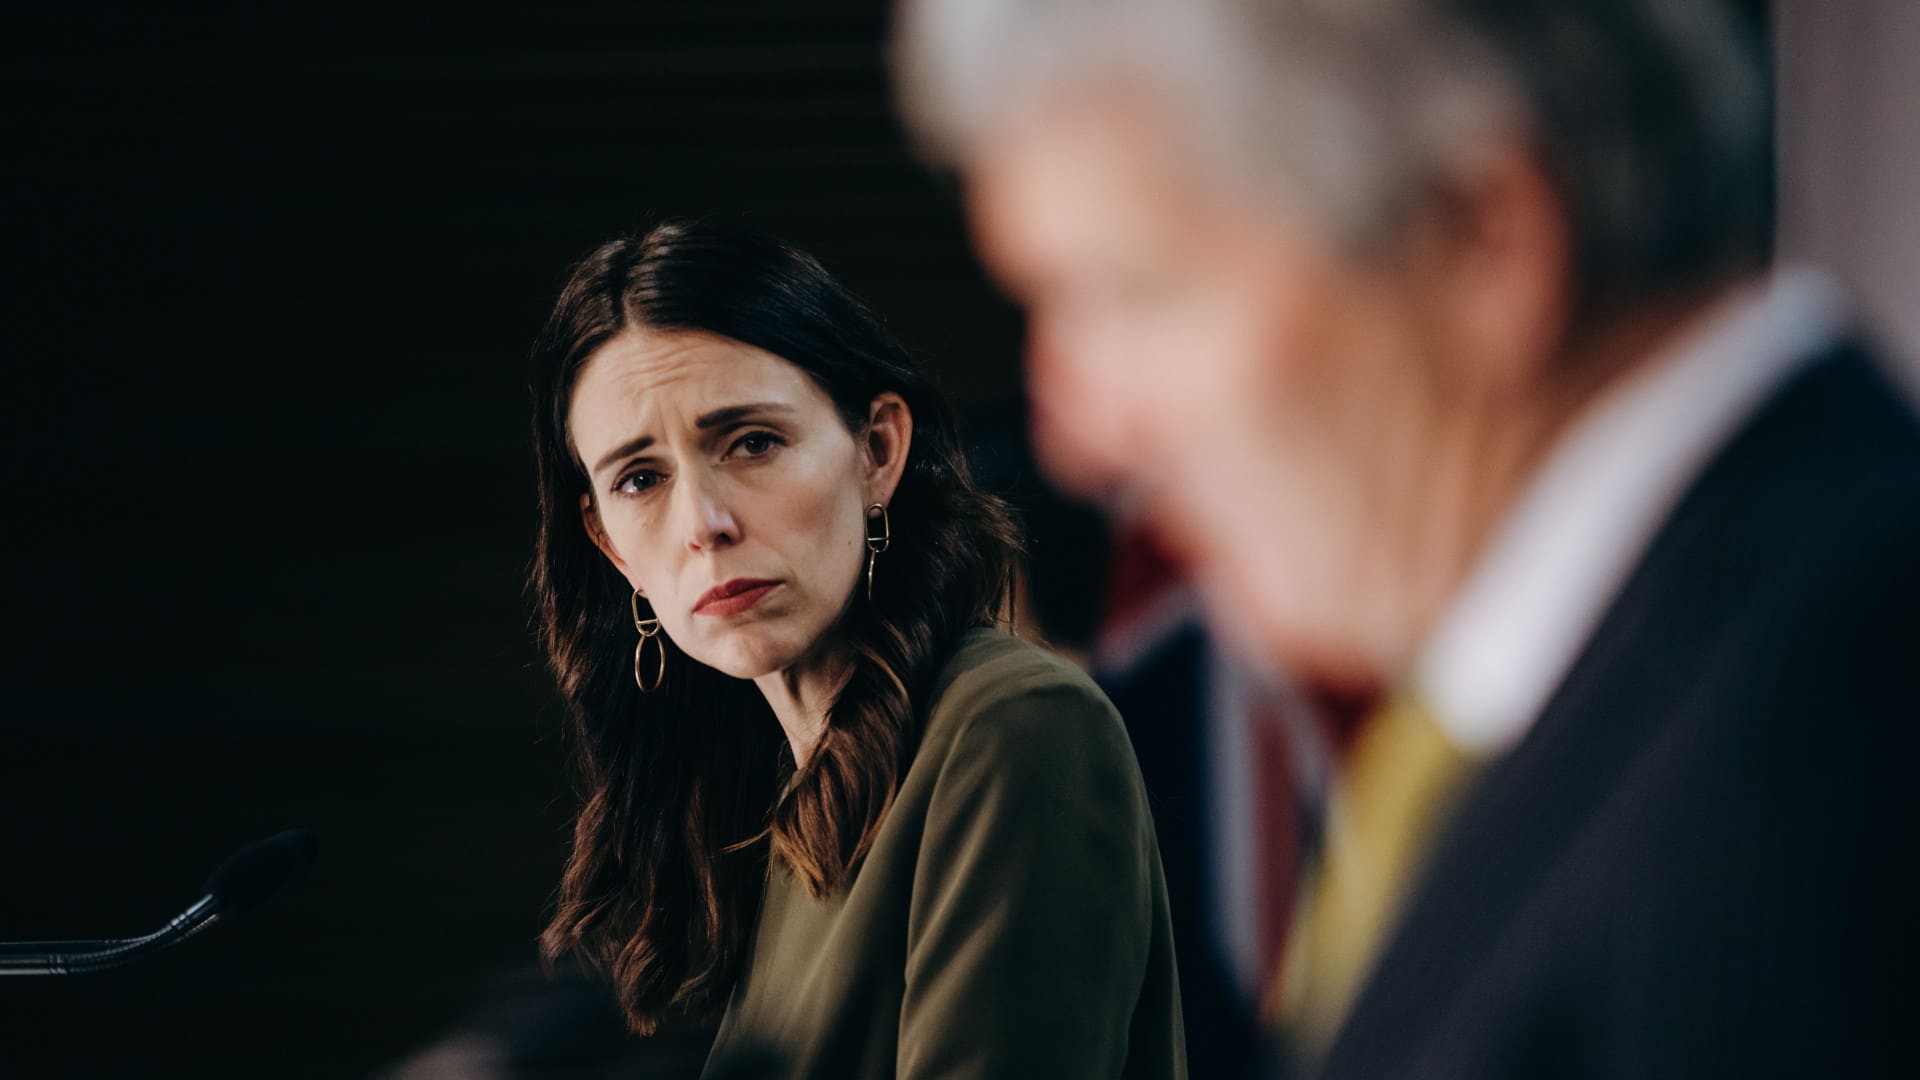 Prime Minister of New Zealand Jacinda Ardern at a Covid-19 update at Parliament in May 2020.